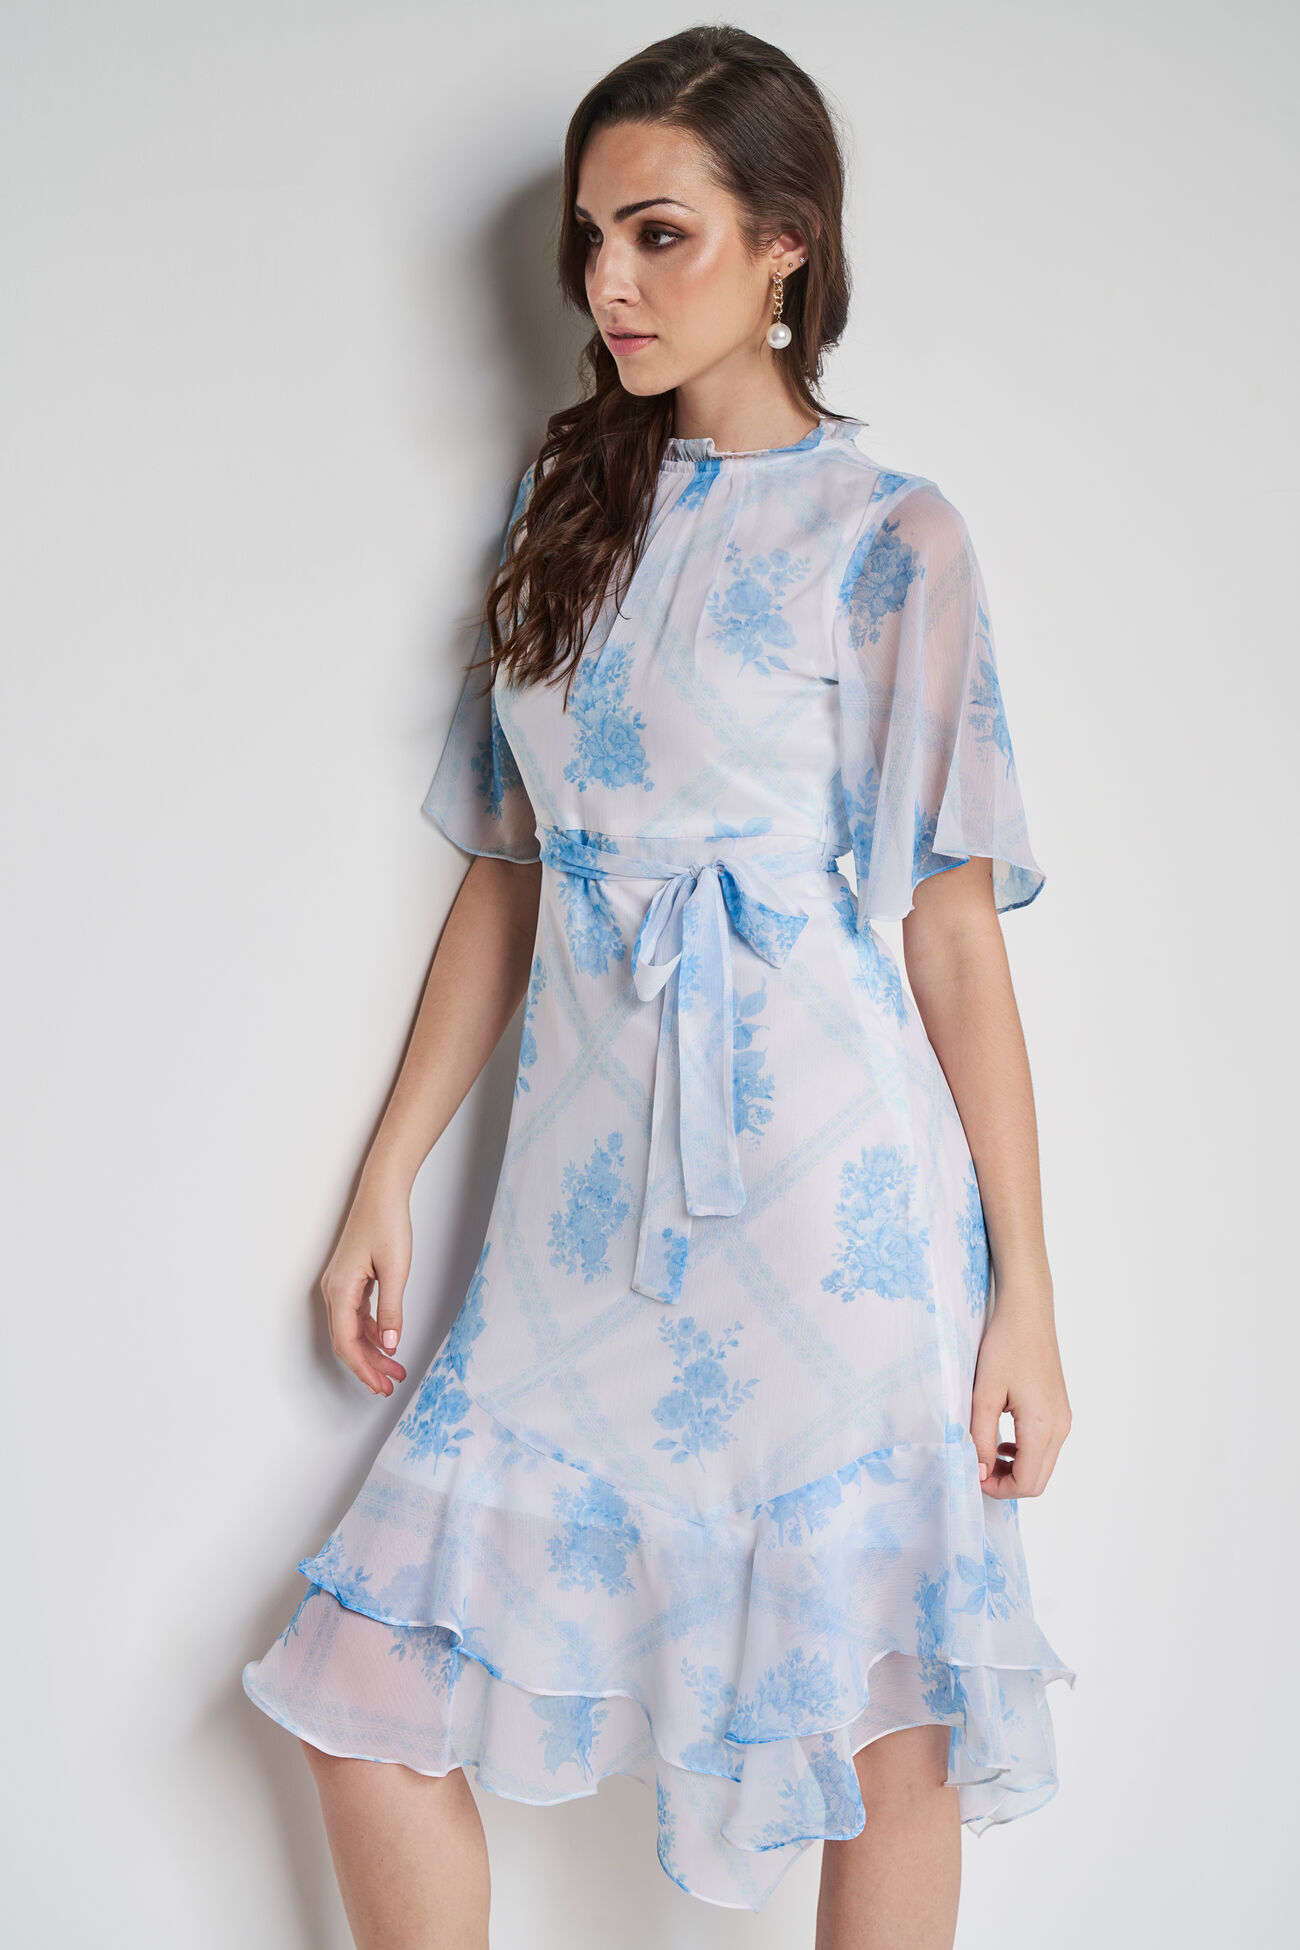 White and Blue Floral Asymmetric Dress, White, image 4